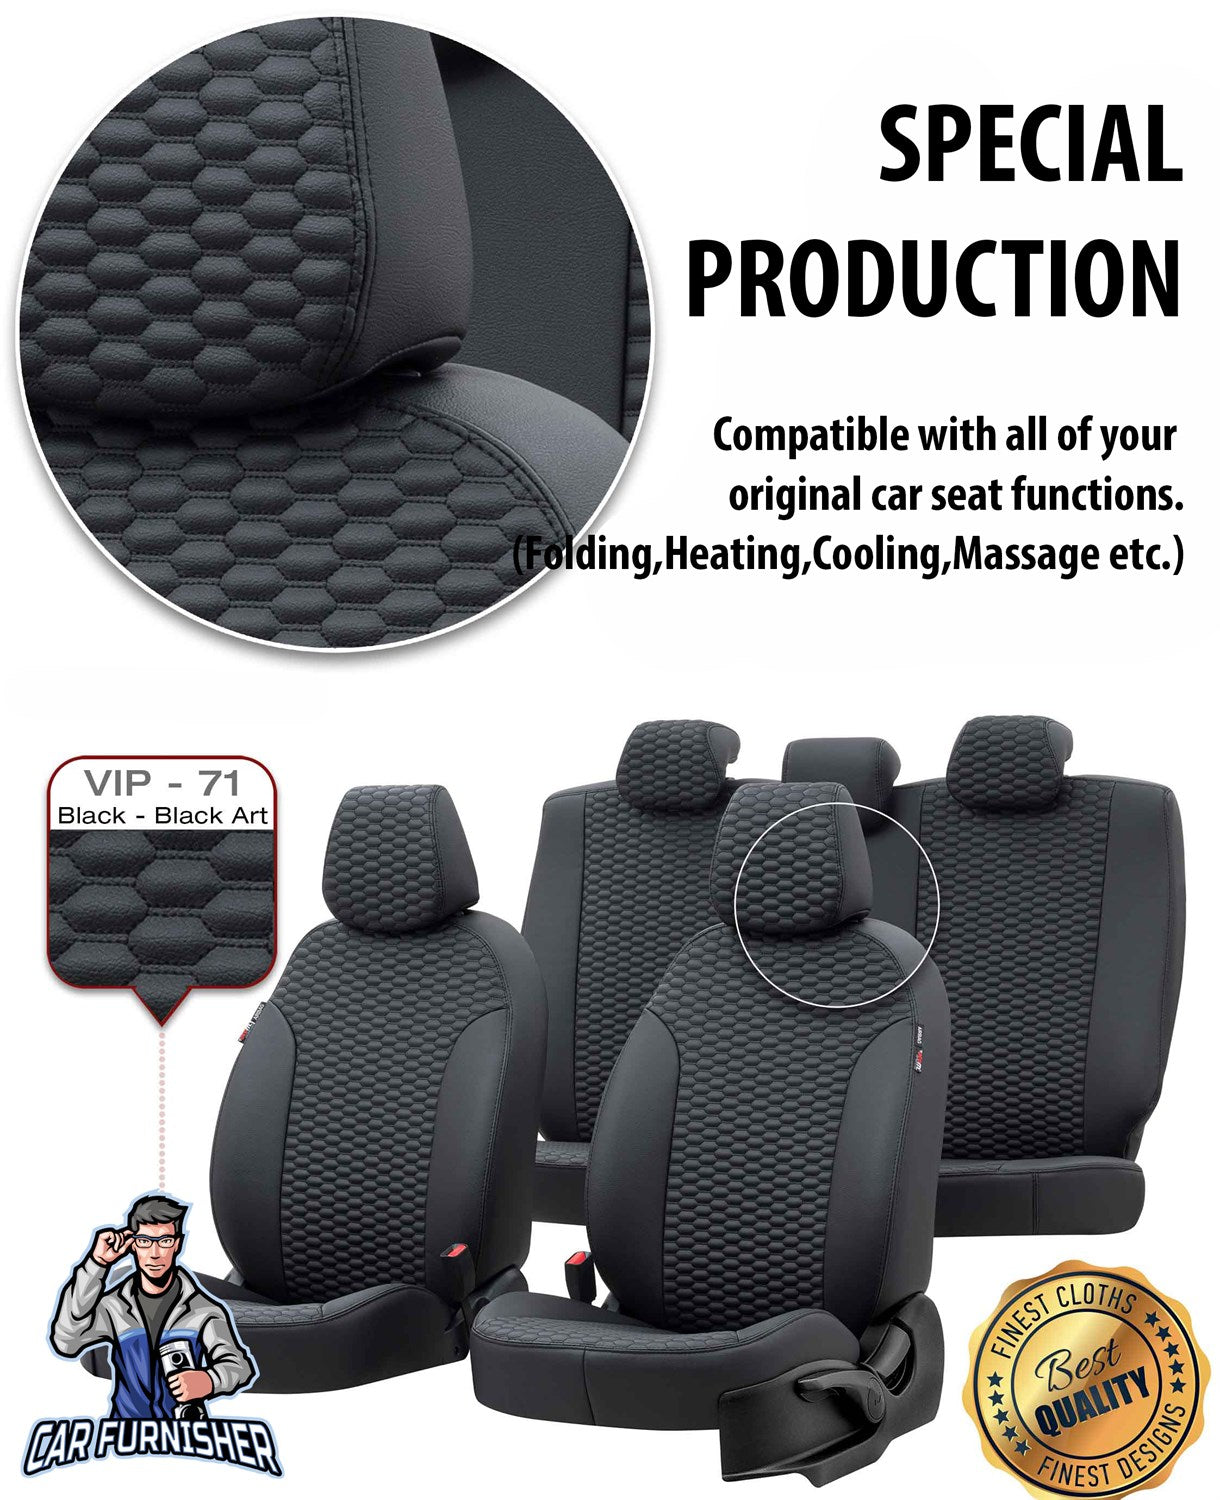 Volkswagen Bora Seat Cover Tokyo Leather Design Ivory Leather